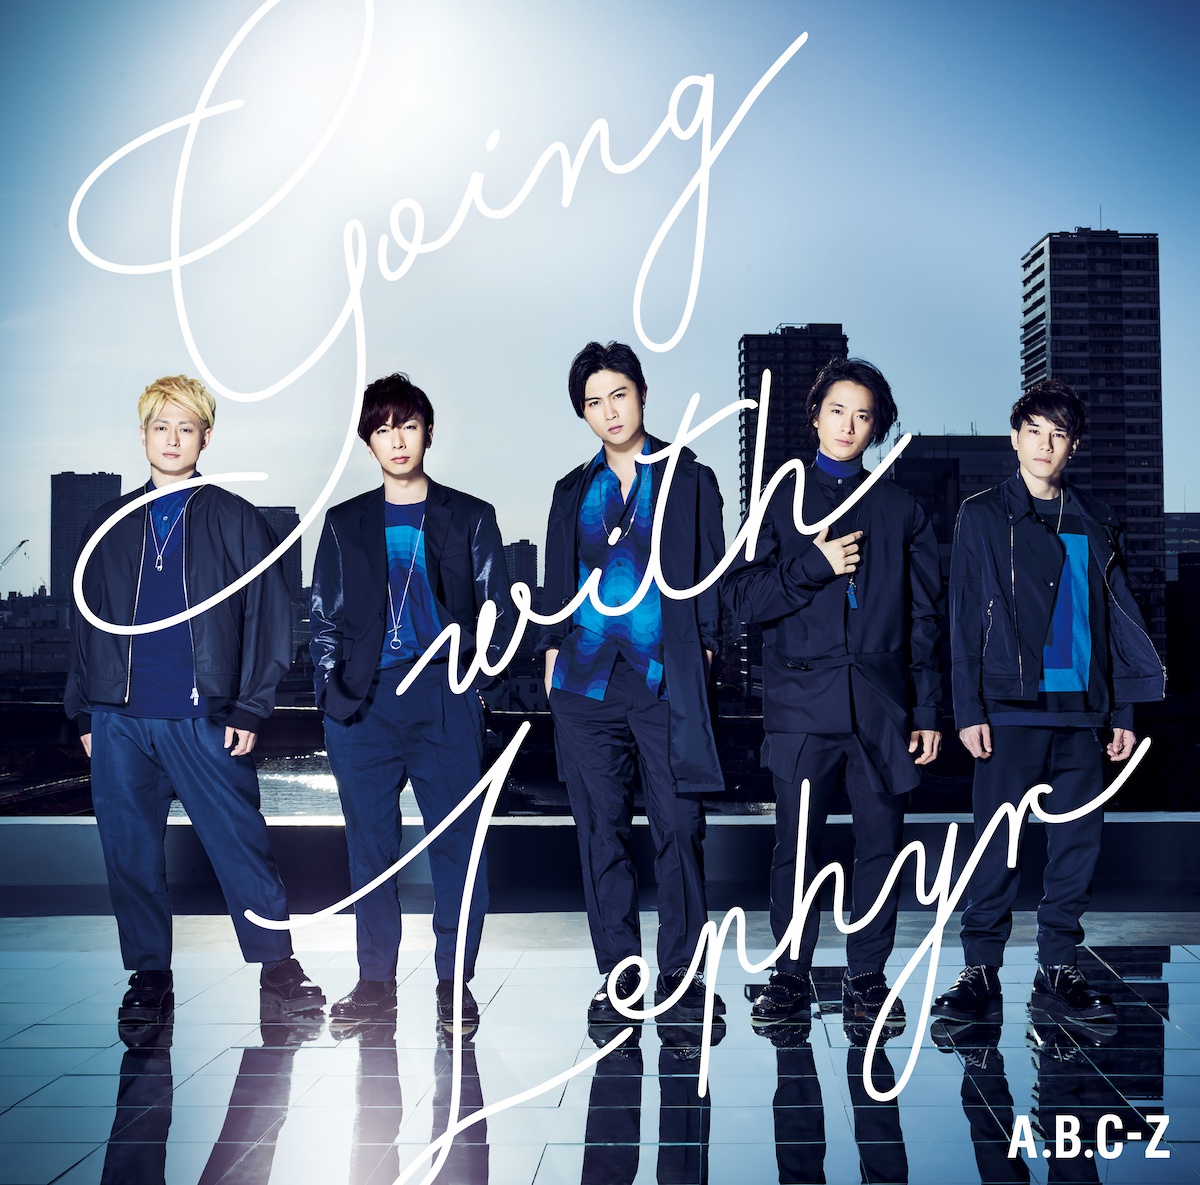 『A.B.C-Z - Chance to Change』収録の『Going with Zephyr』ジャケット